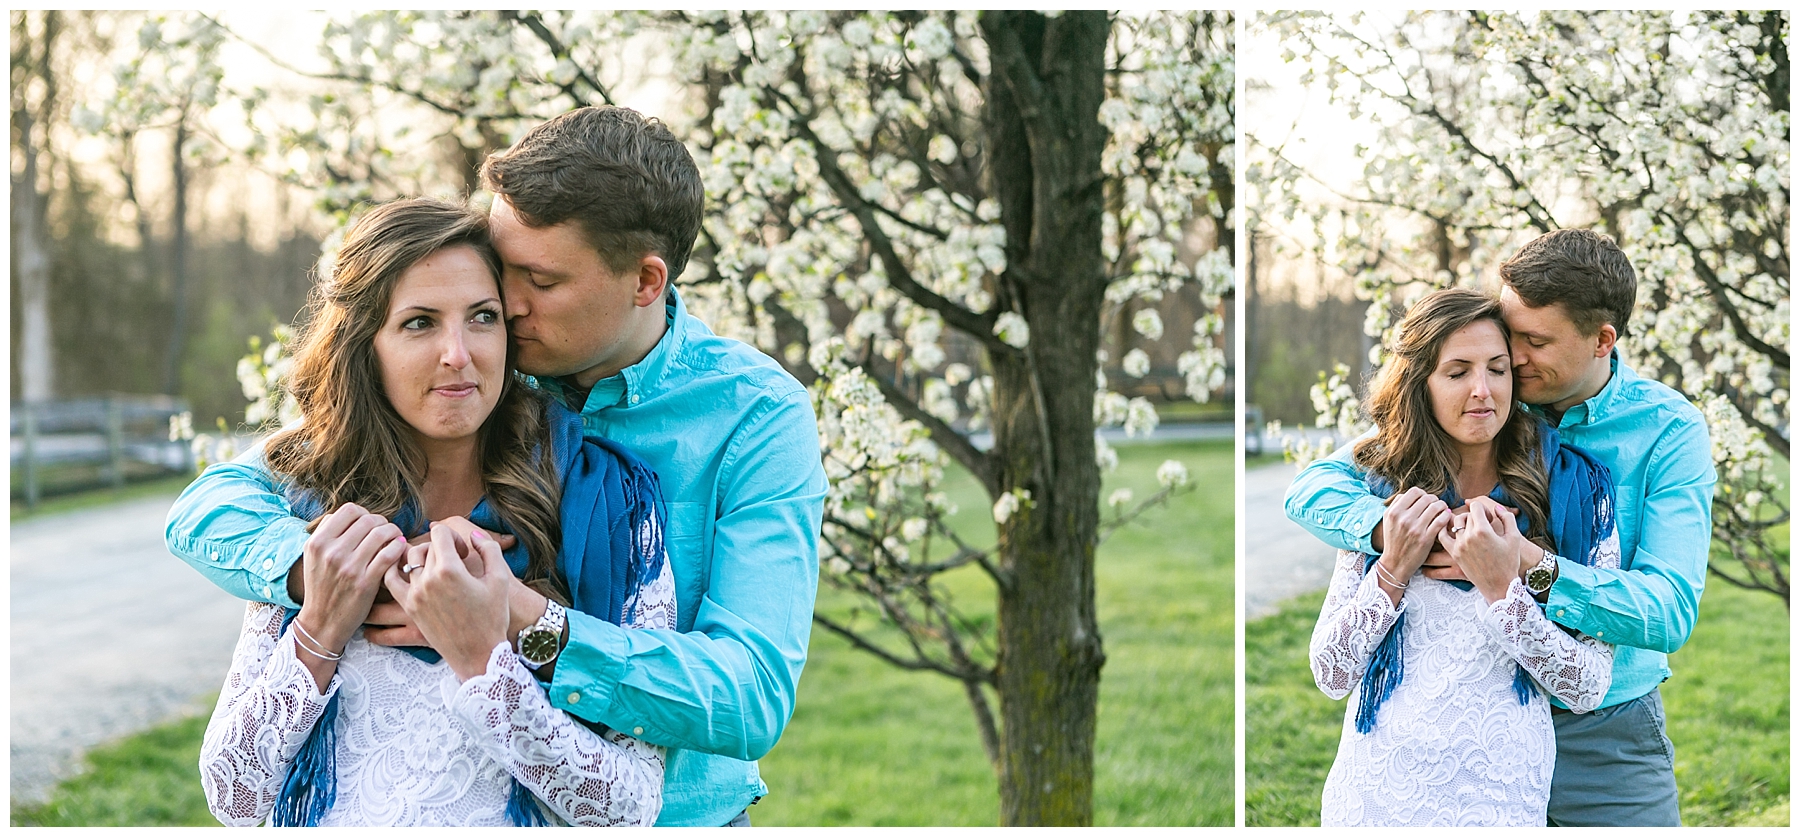 Chelsea Phil Private Estate Engagement Living Radiant Photography photos color_0031.jpg